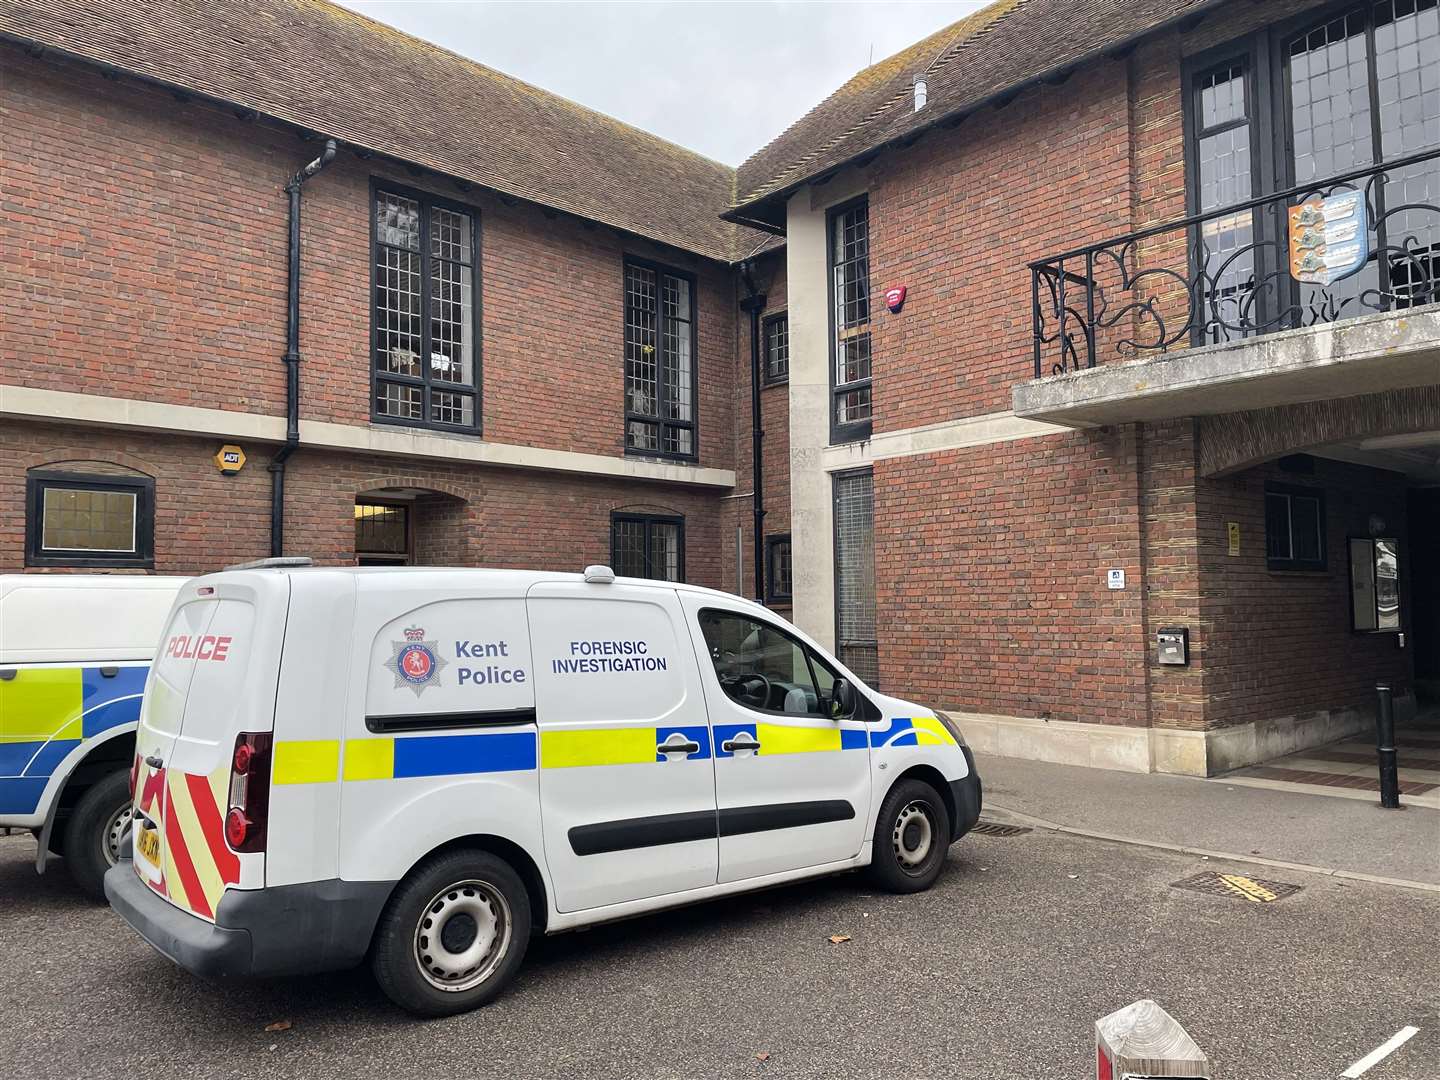 Police and forensic vehicles at Sandwich Guildhall after the incident